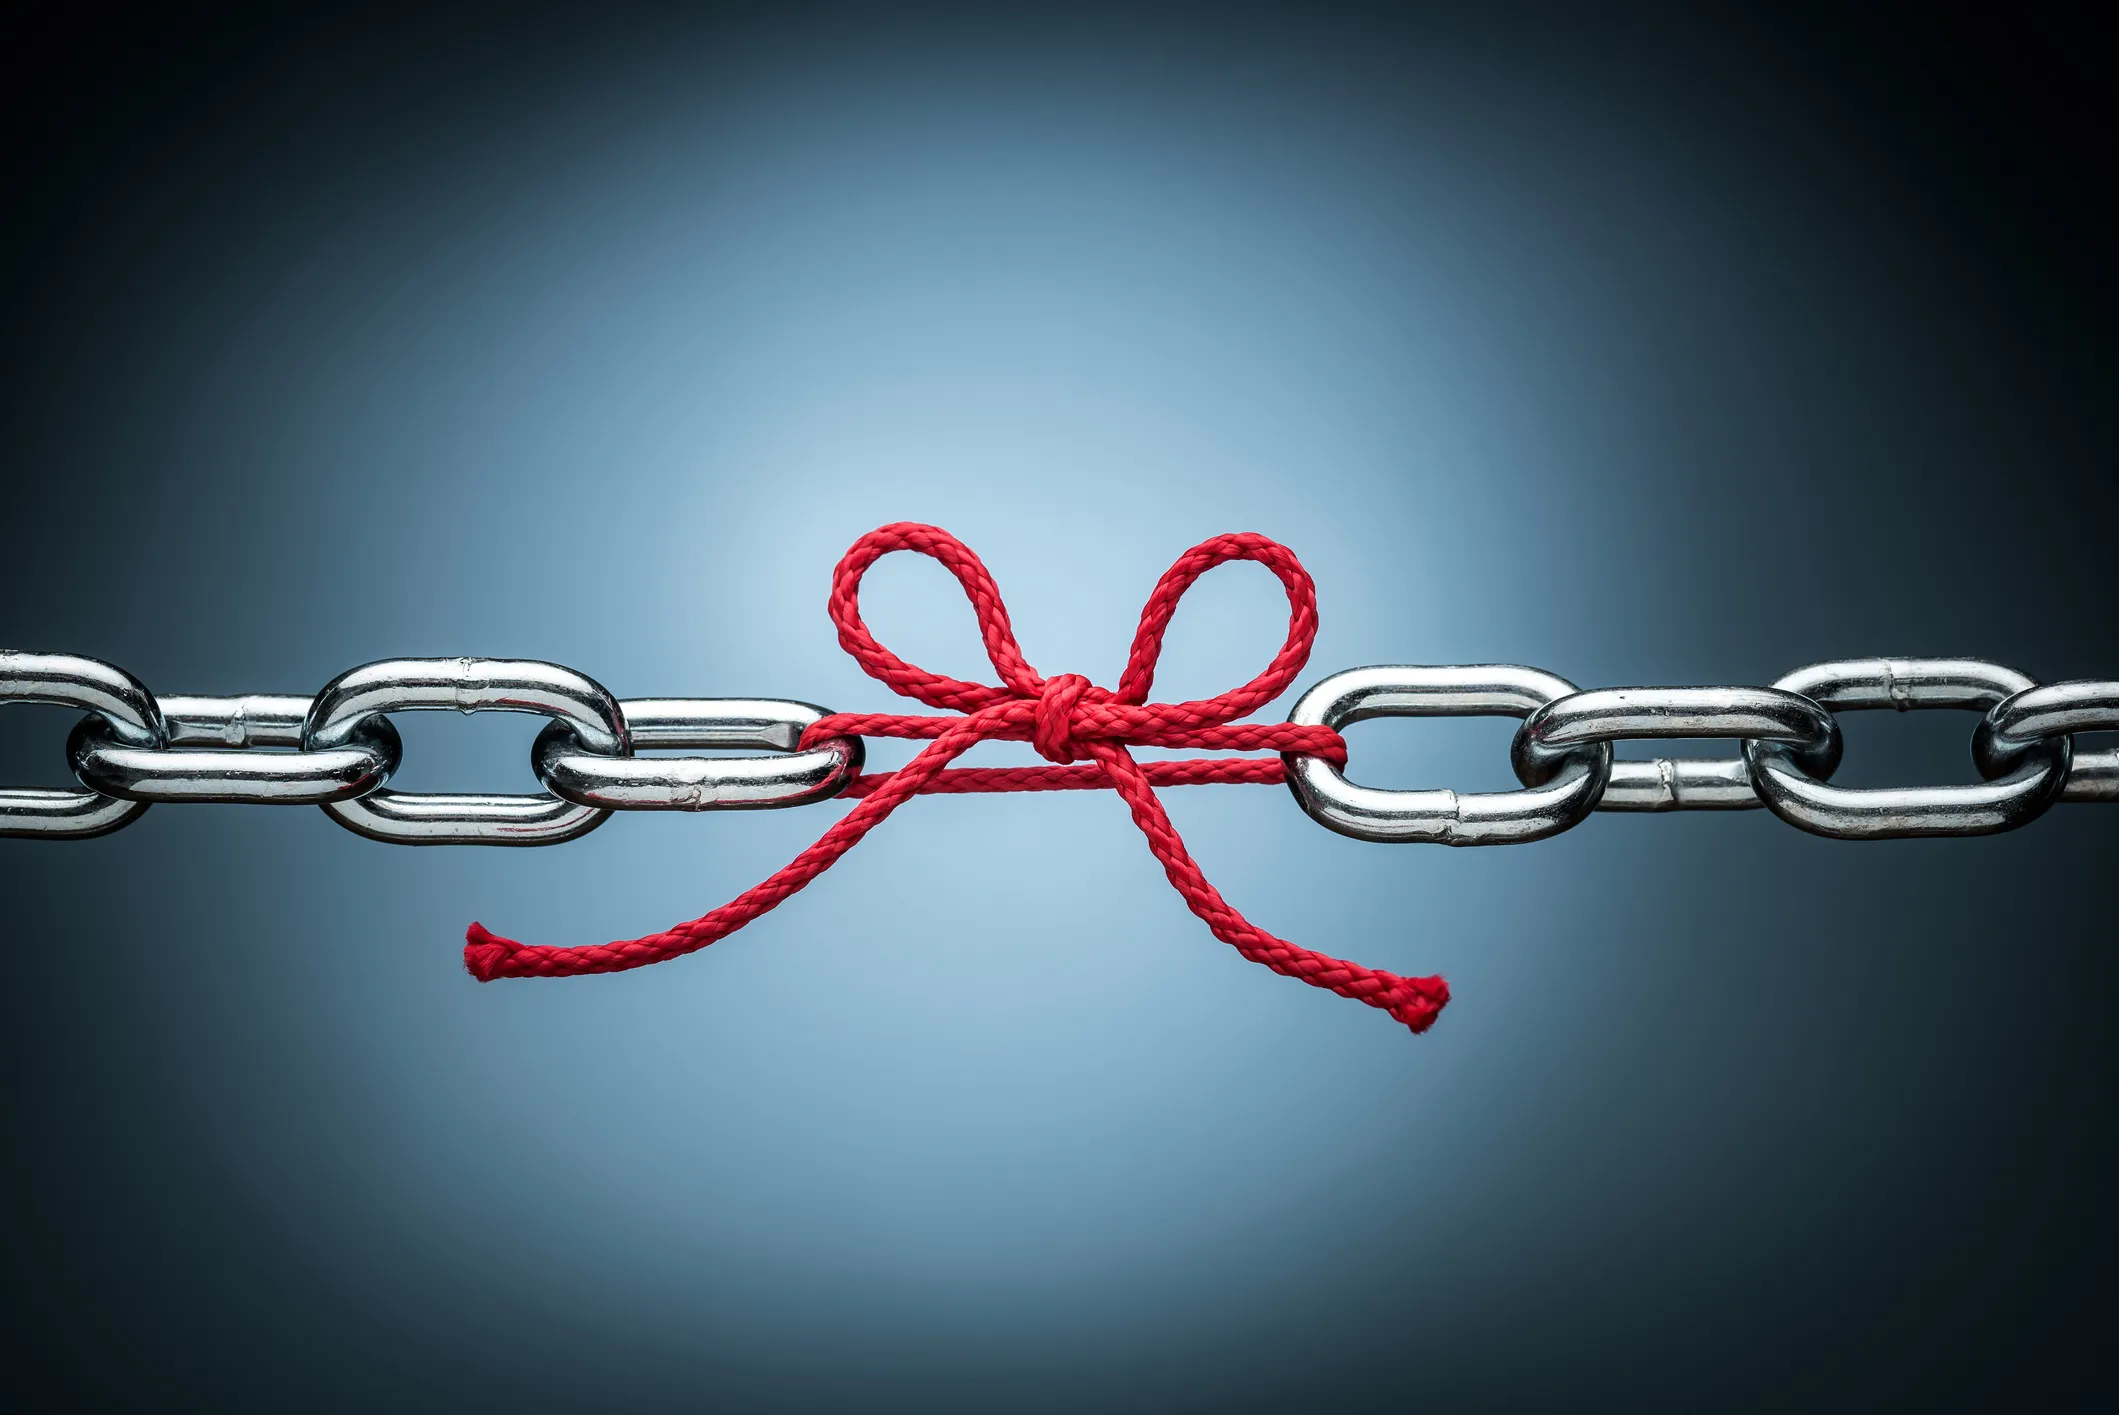 A Red ribbon connect two chain links to represent the role of link analysis in investigations.